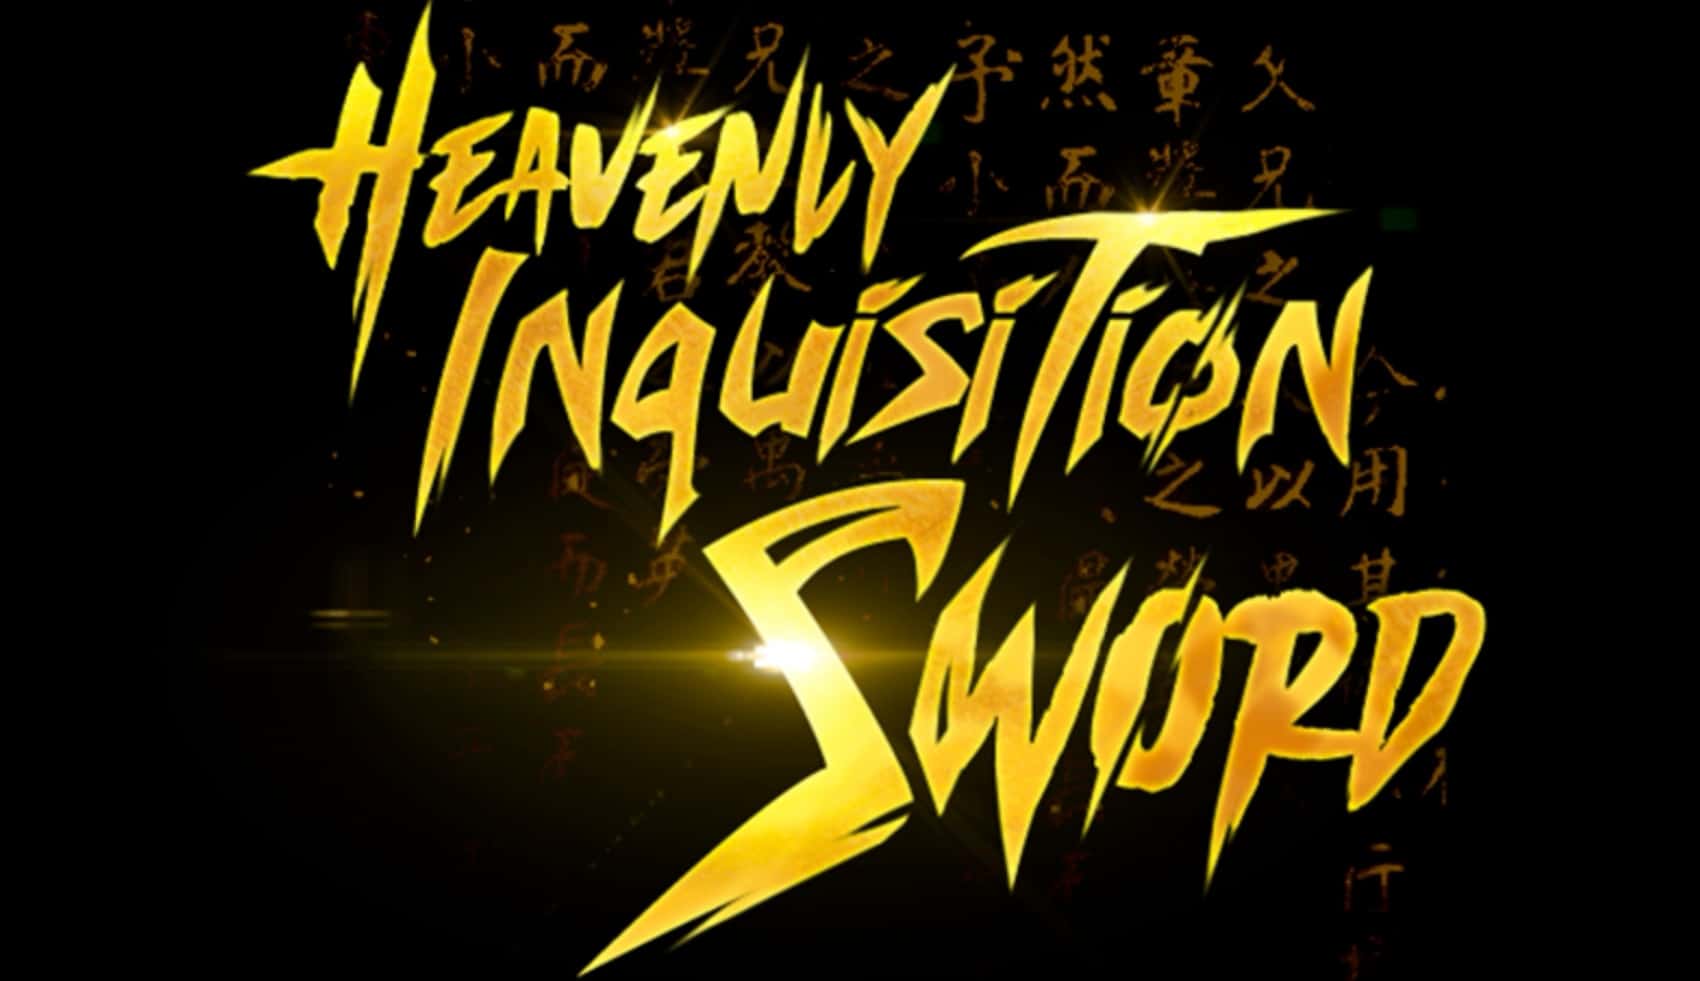 The Heavenly Inquisition Sword Chapter 57: Ngày phát hành & Spoiler